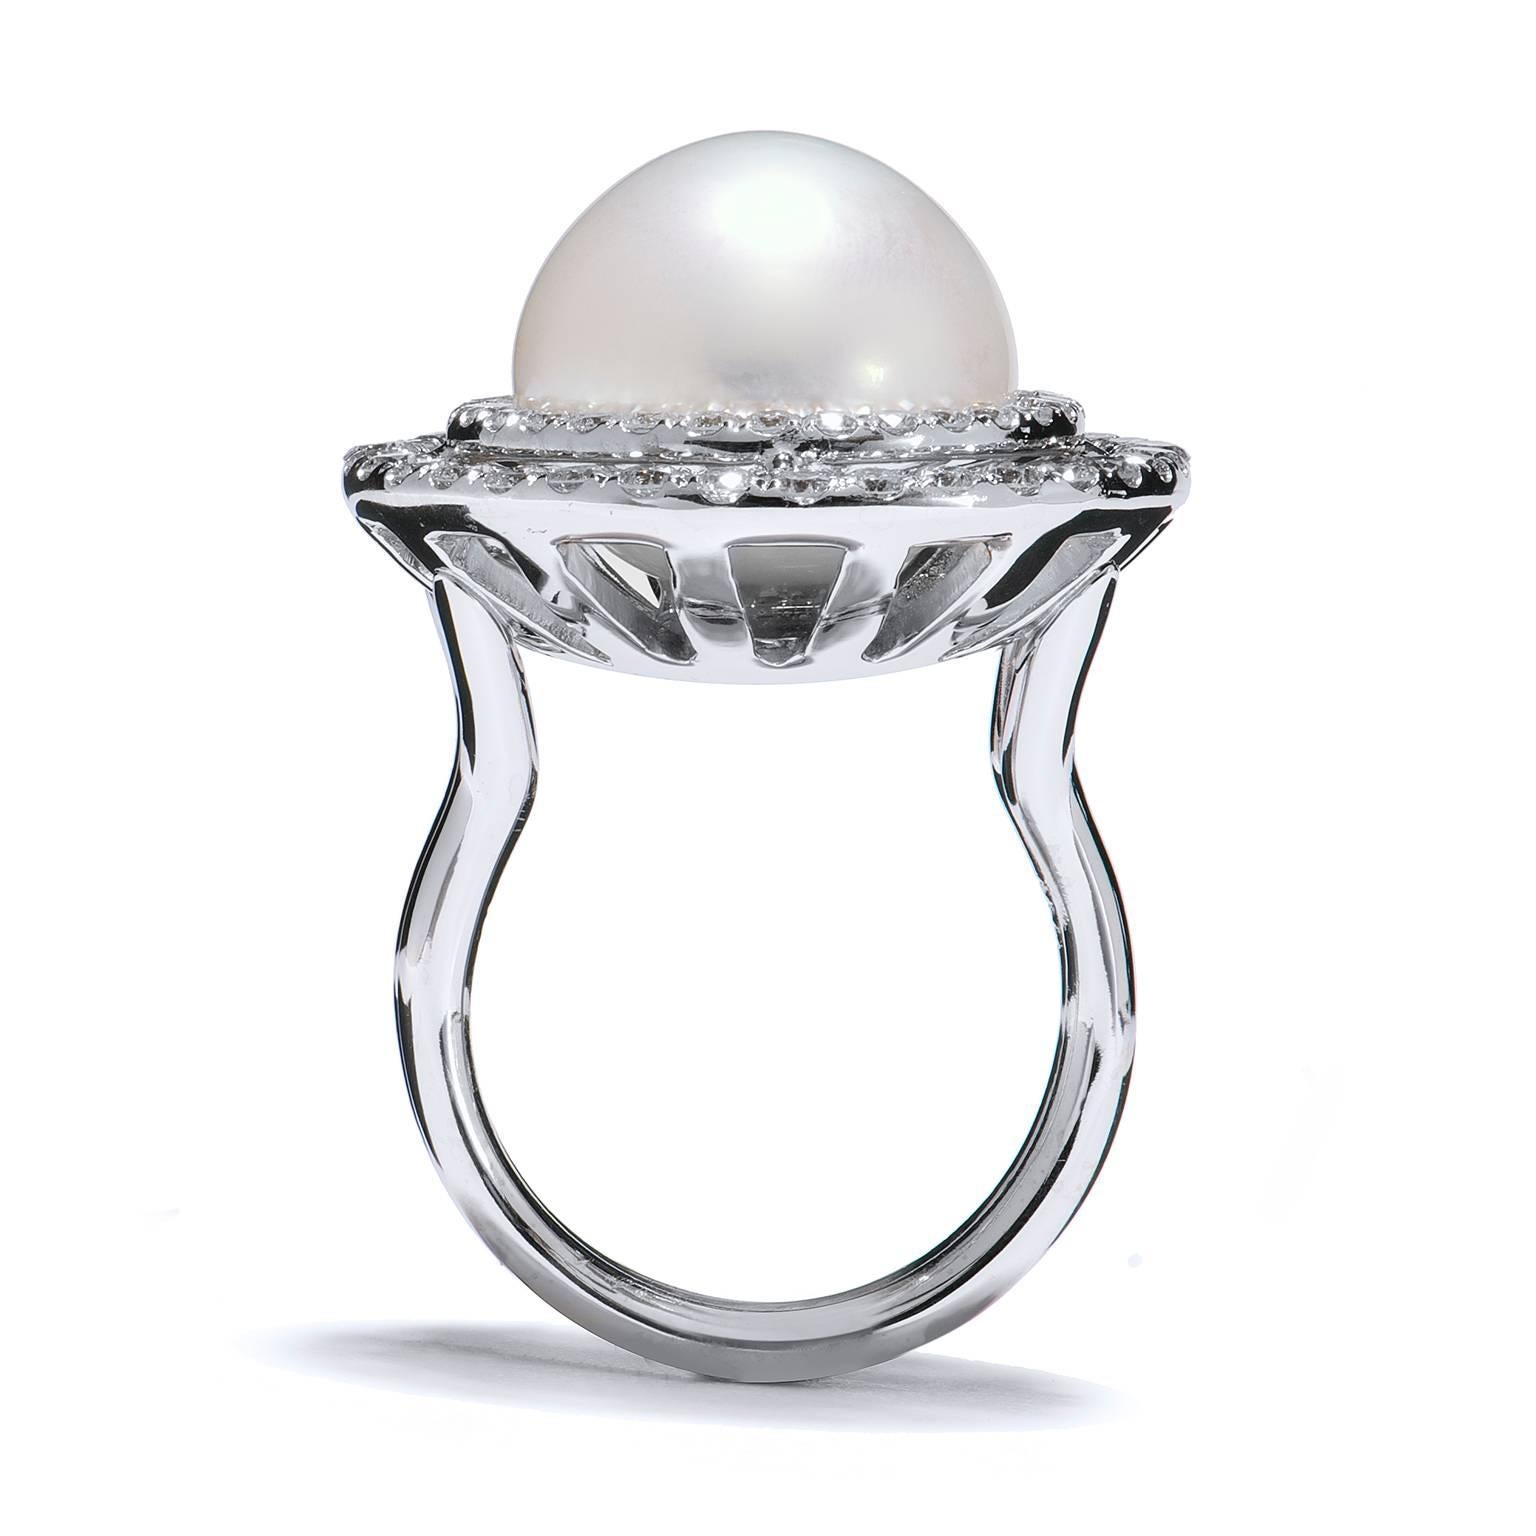 Every pearl is unique and no two pearls are alike. A true testament to nature’s beauty, it is the only gemstone created by a living animal. Crafted in 18kt white gold, this ring features an impressive 14.10mm pearl surrounded by 1.49ct of double set